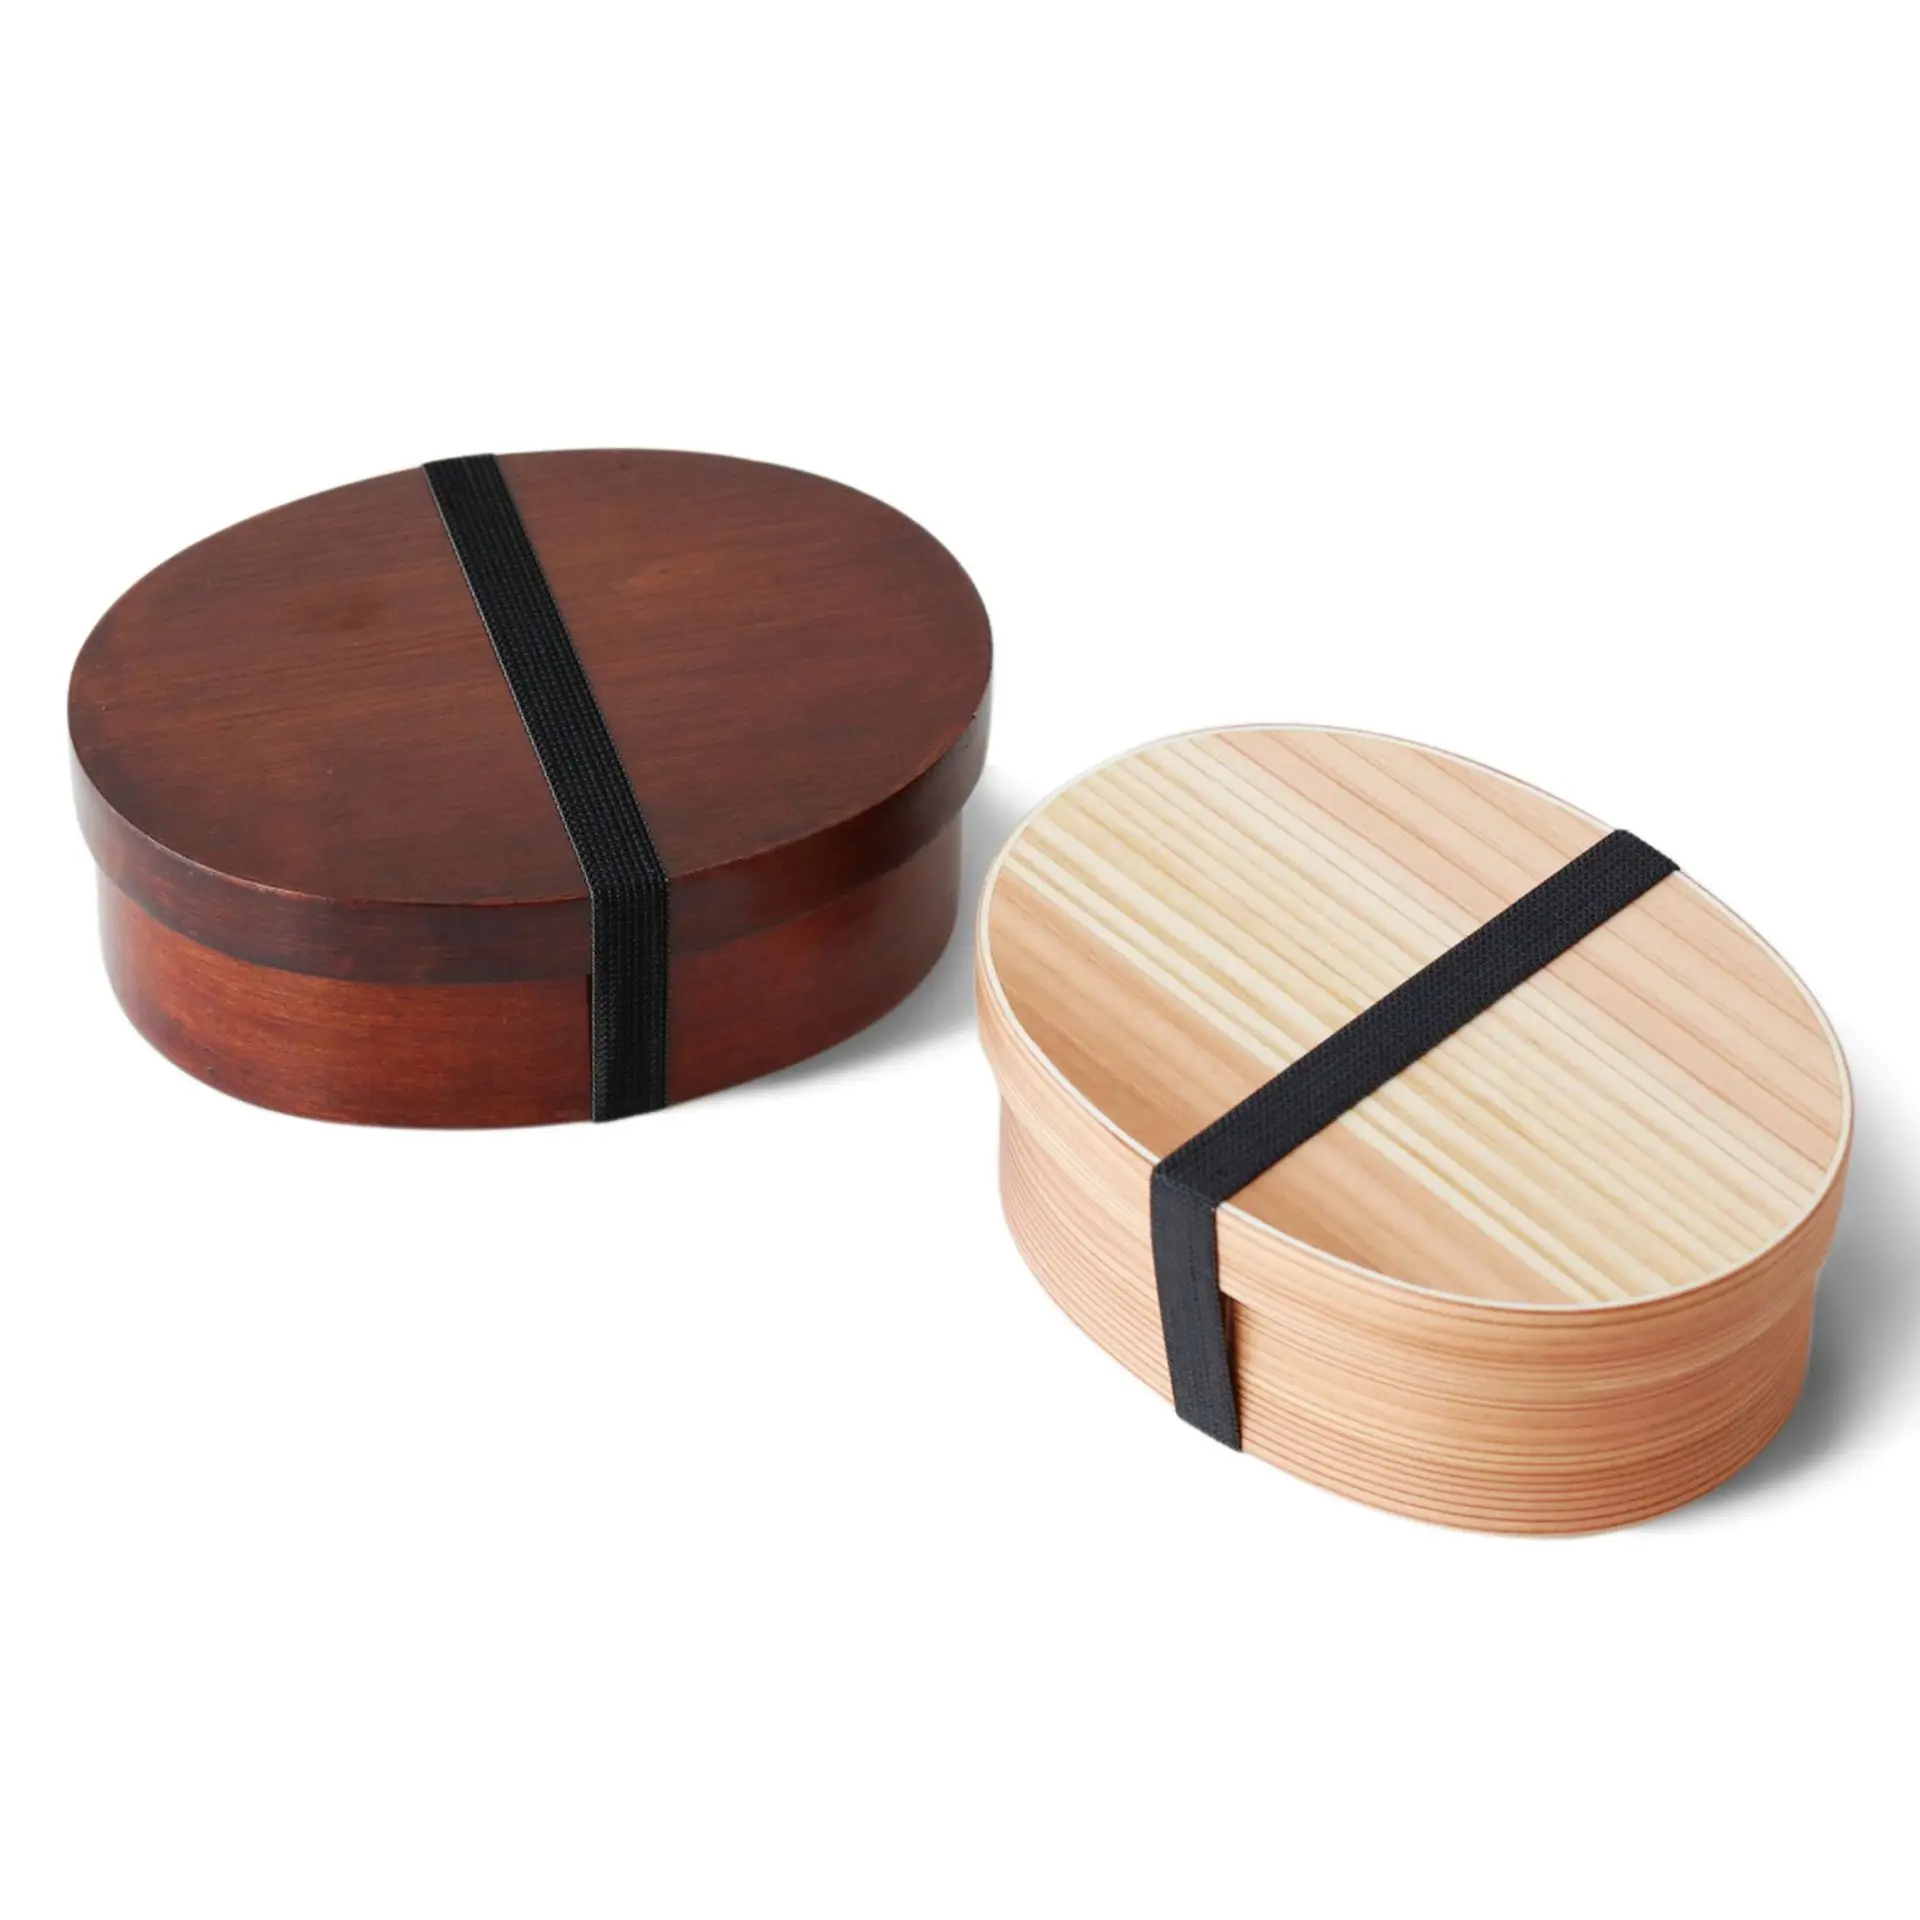 

Wooden Bento Box Lunch Box Japanese Bento Boxes Picnic Dinnerware for Food Container Sushi Case with Tableware Retro Lunchbox